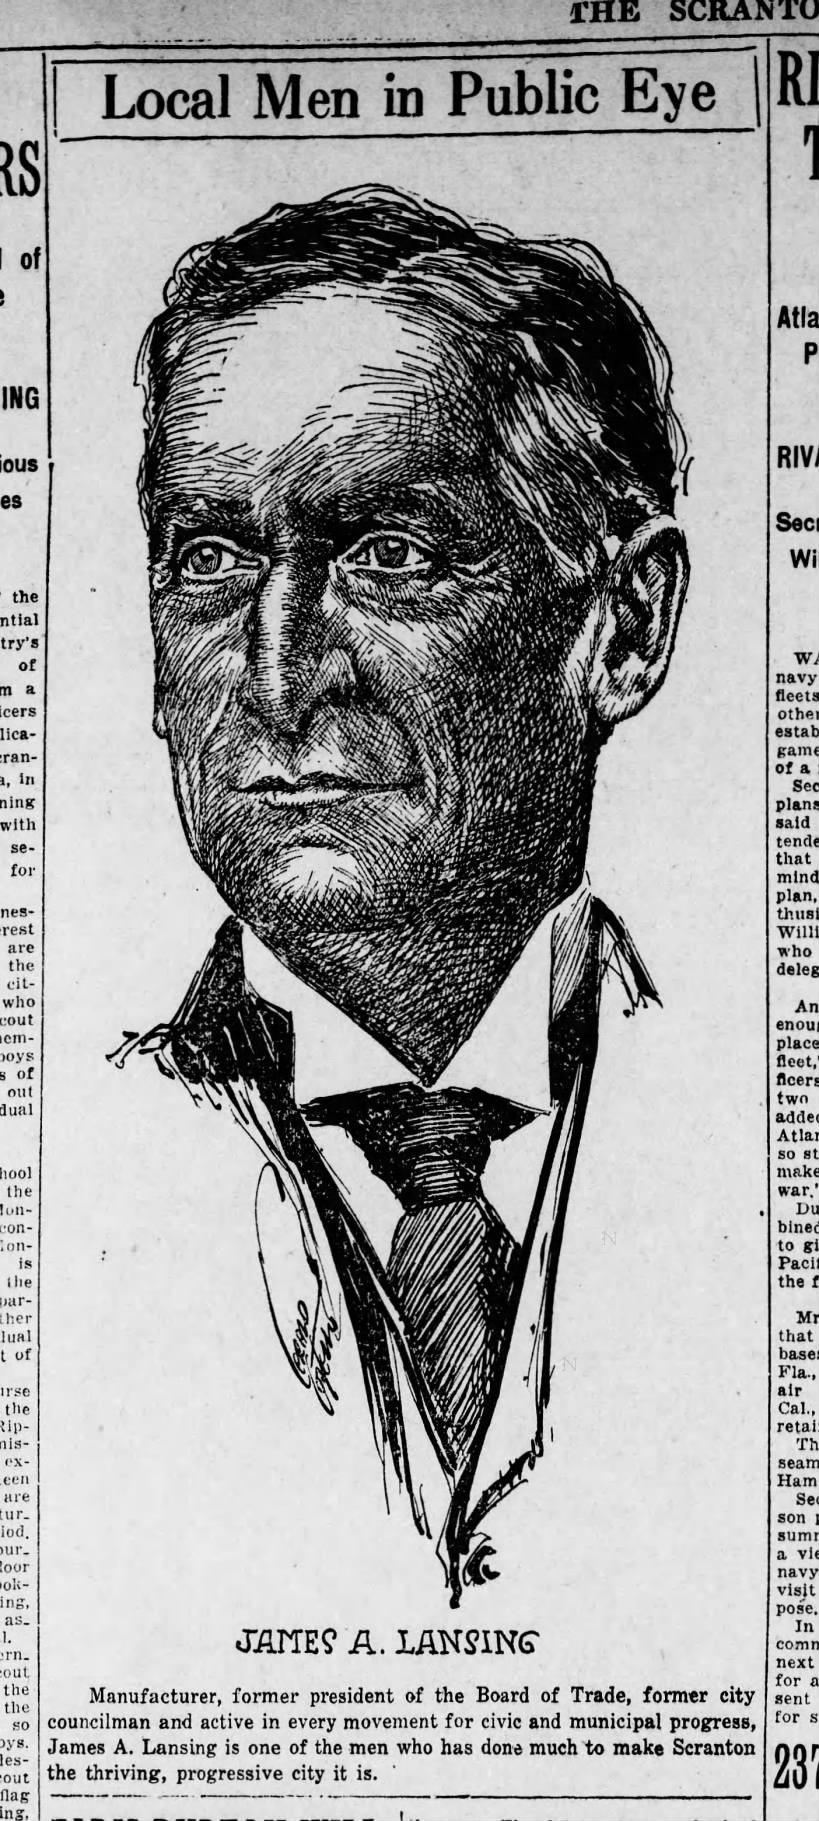 Jerry Costello Portrait of James A Lansing Scr Rep Jan 3 1919 pg 2